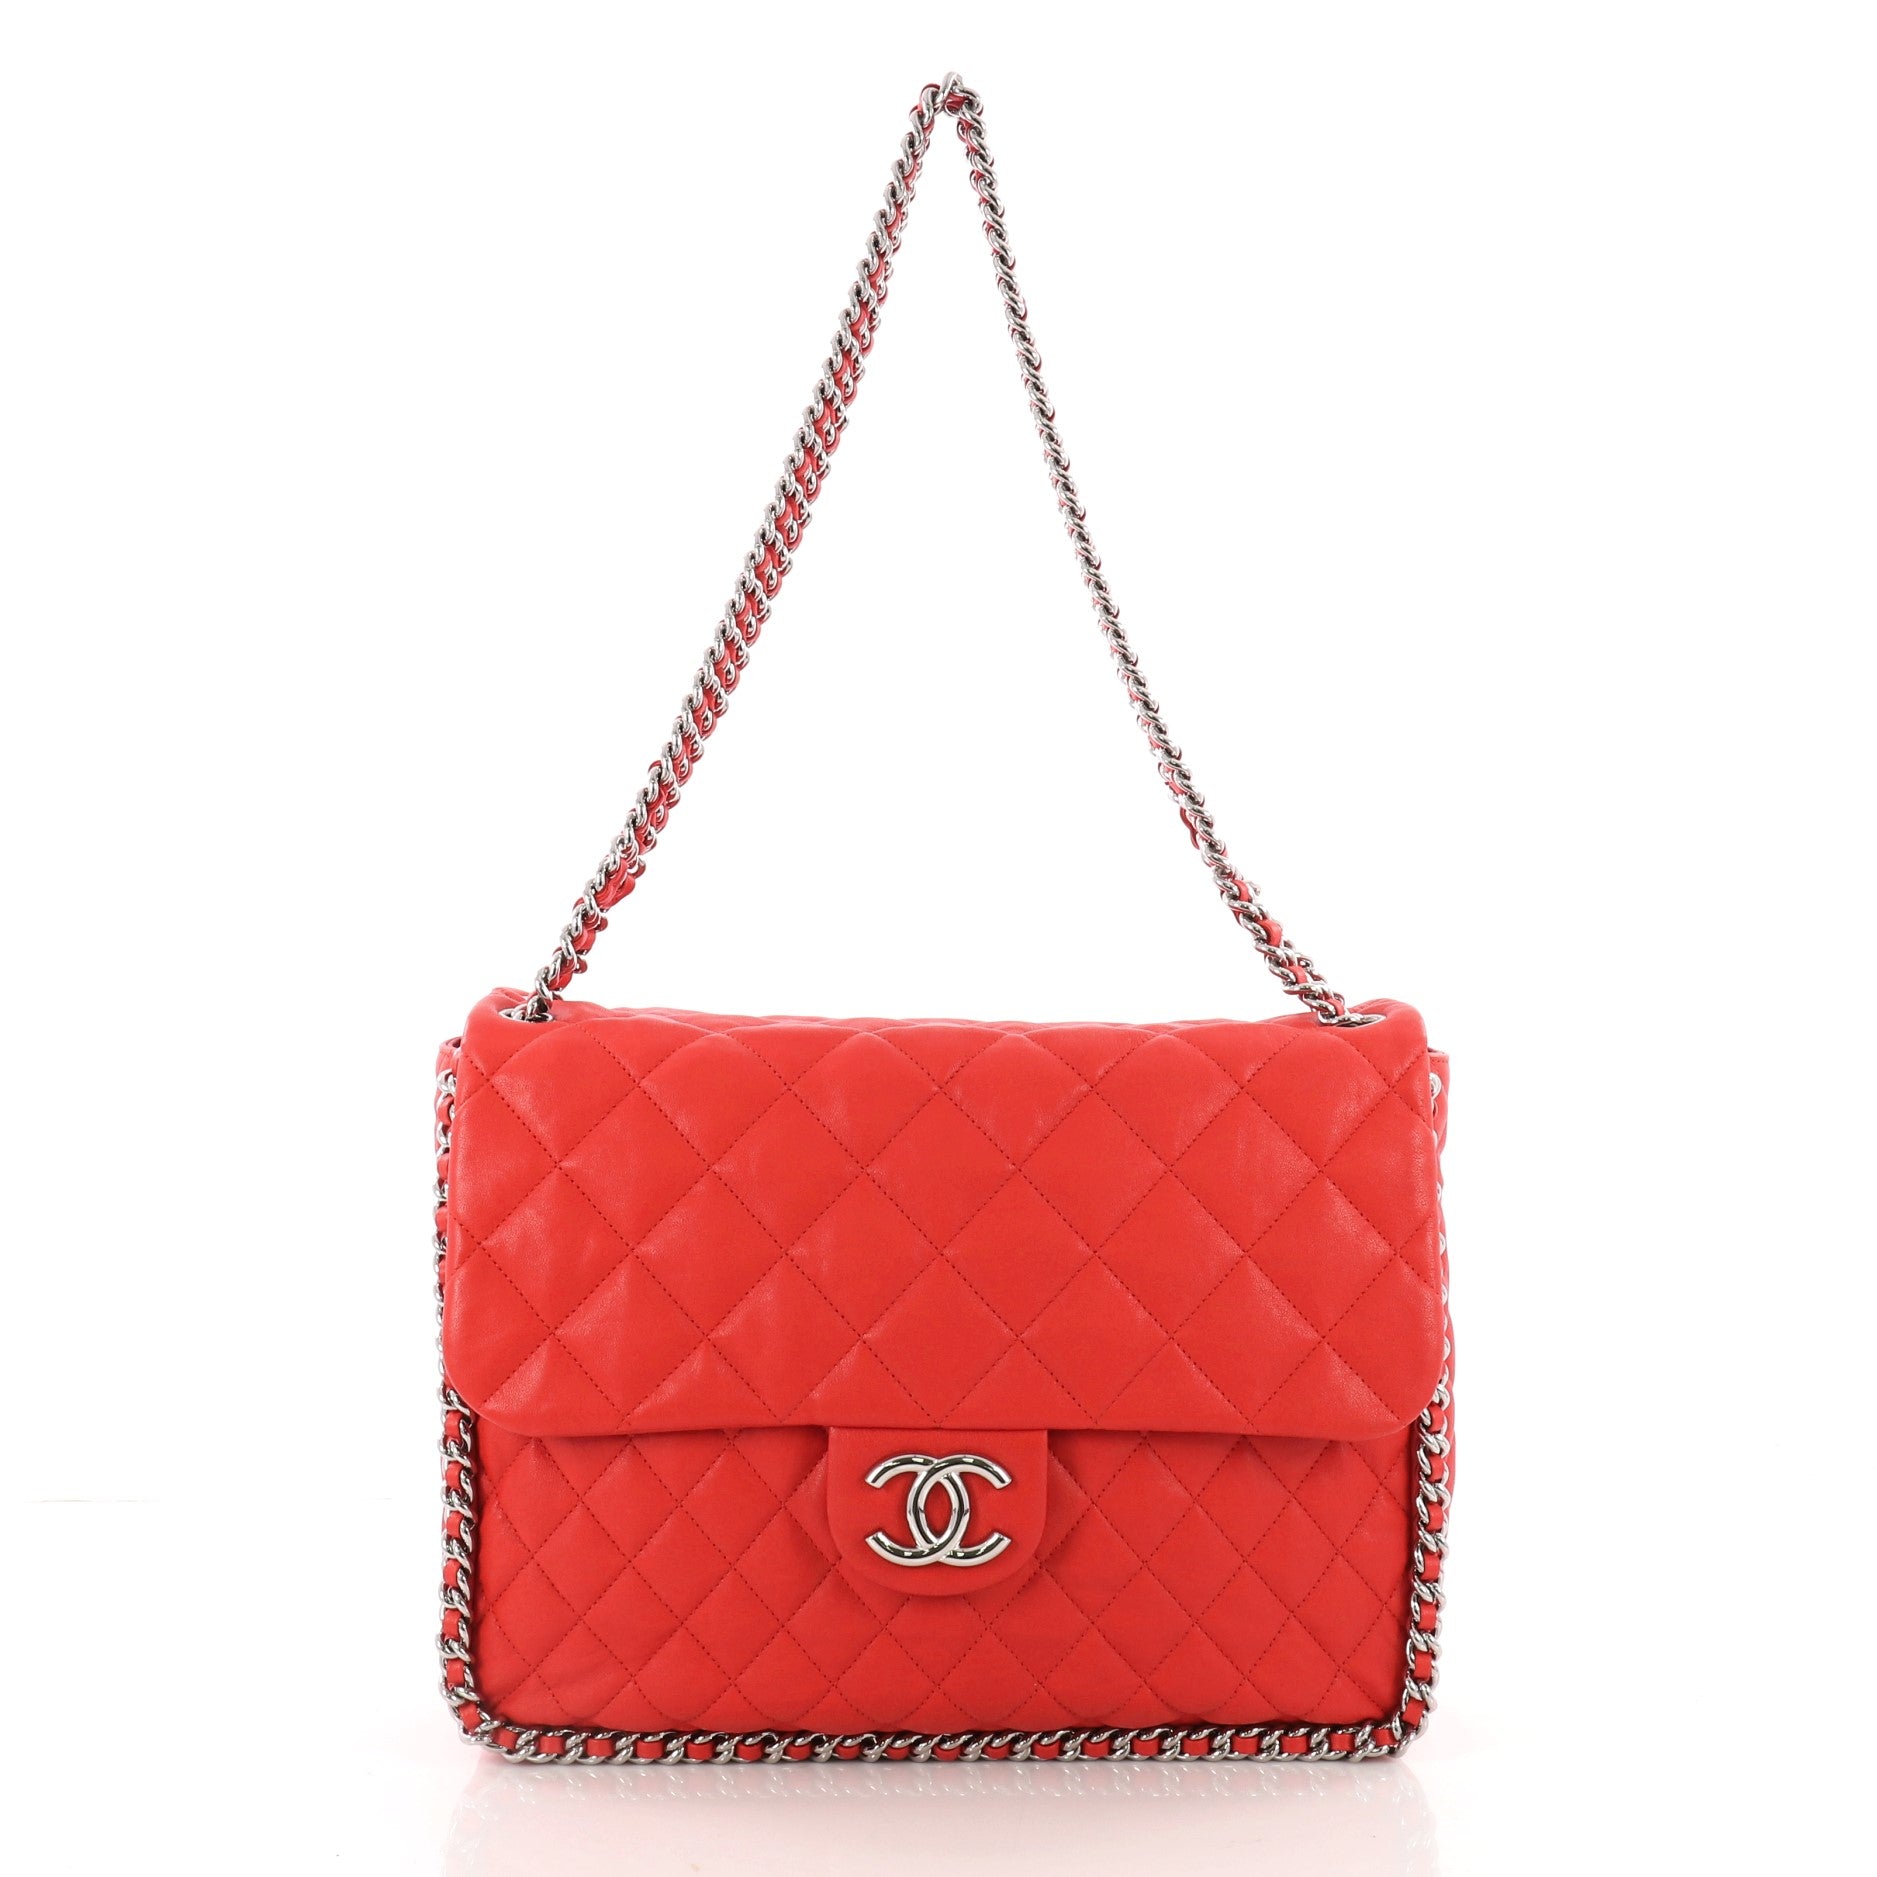 VINTAGE HAND BAG CHANEL TIMELESS TRAPEZE BANDOULIERE RED LEATHER